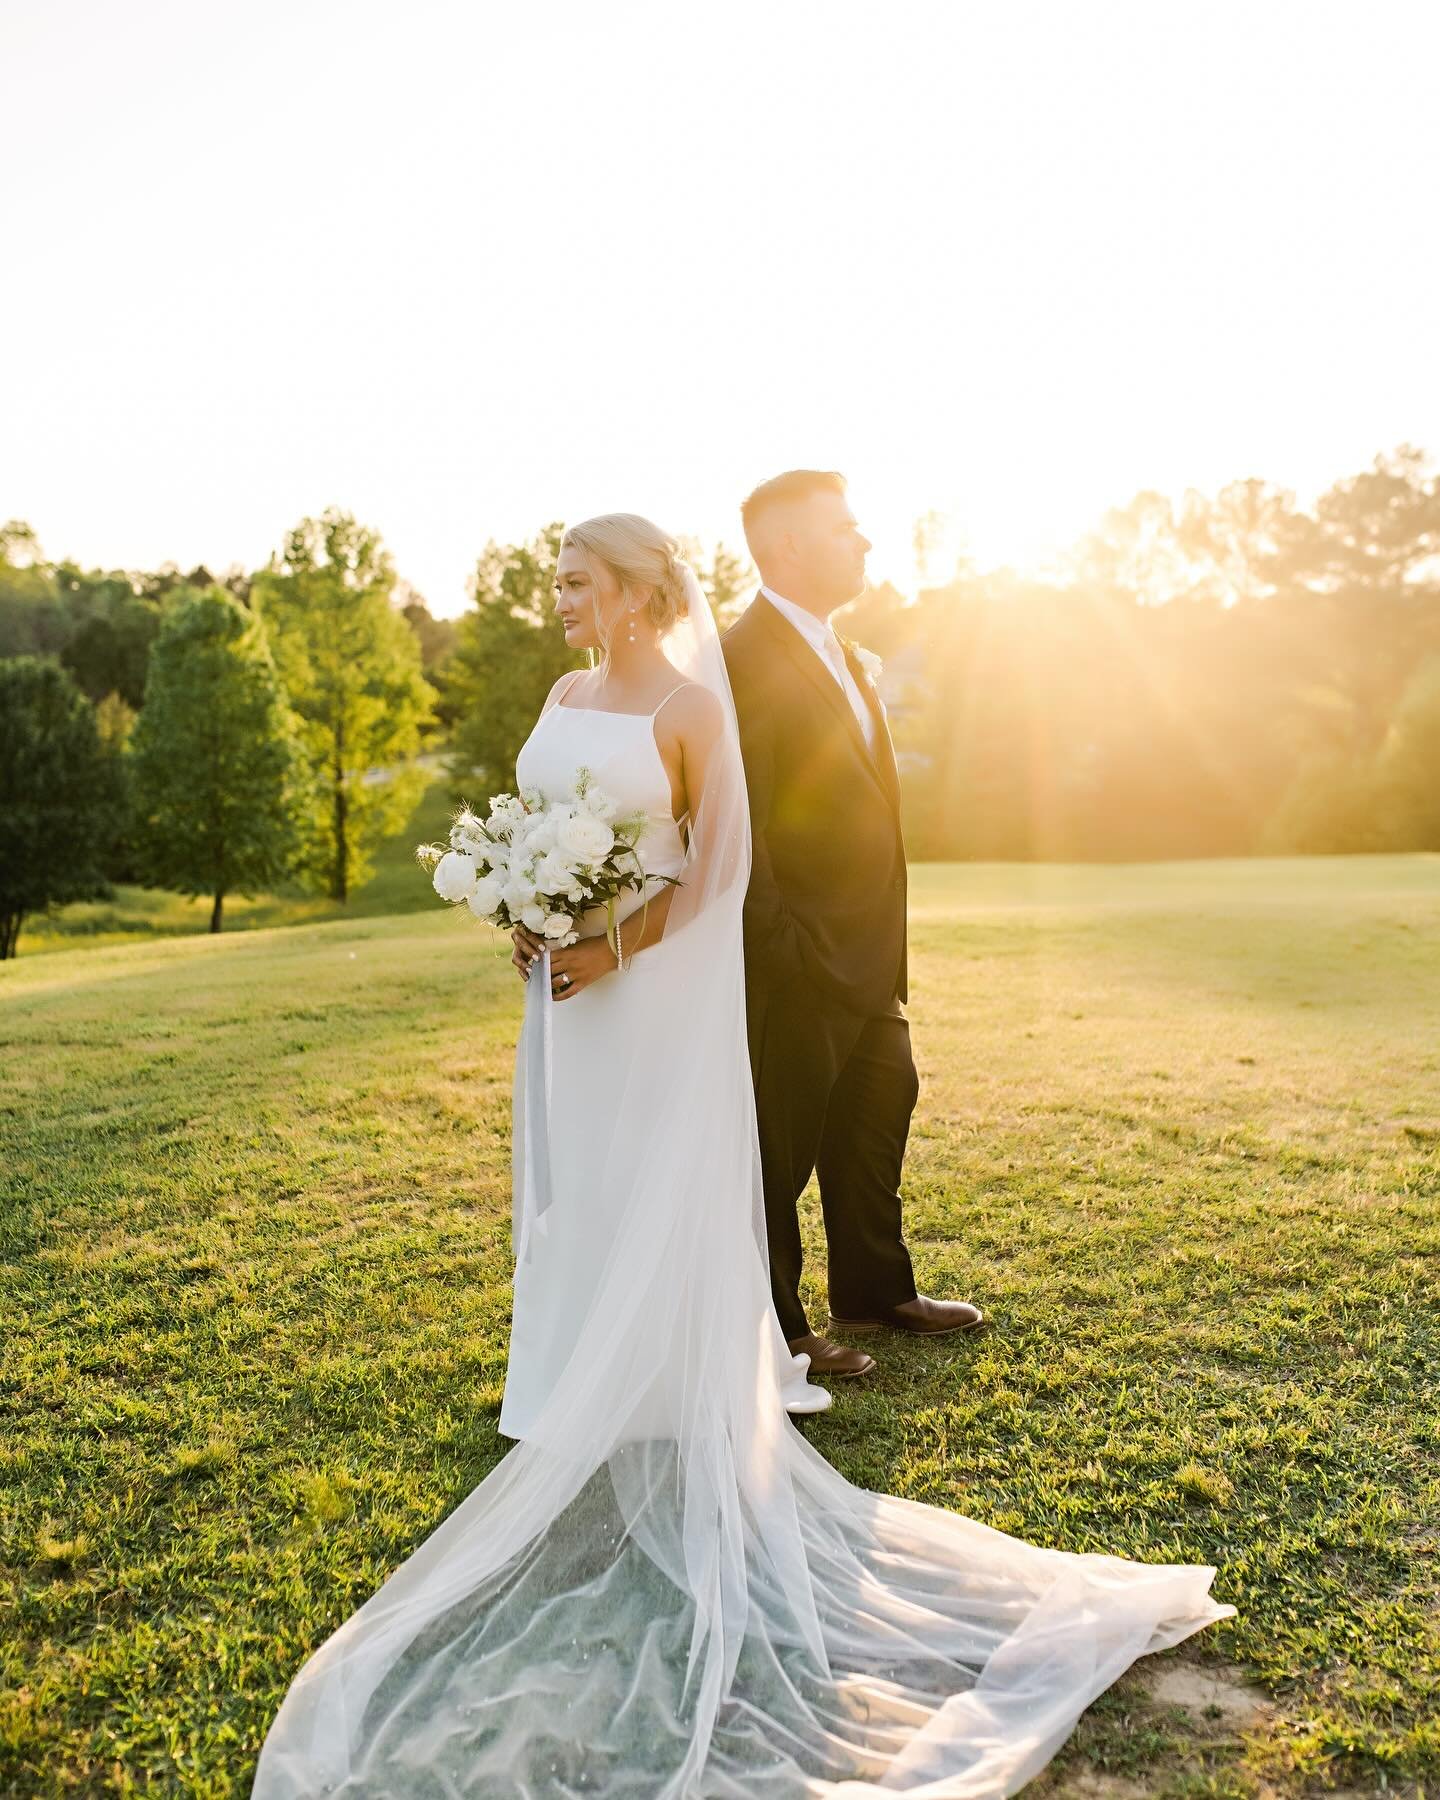 Congratulations to the newly wedded Mr. &amp; Mrs. Lawley! Their wedding was the sweetest I&rsquo;ve witnessed! Before the ceremony, Tim and Baleigh Anne wanted to read the vows they wrote for one another privately. The moment was filled with laughte